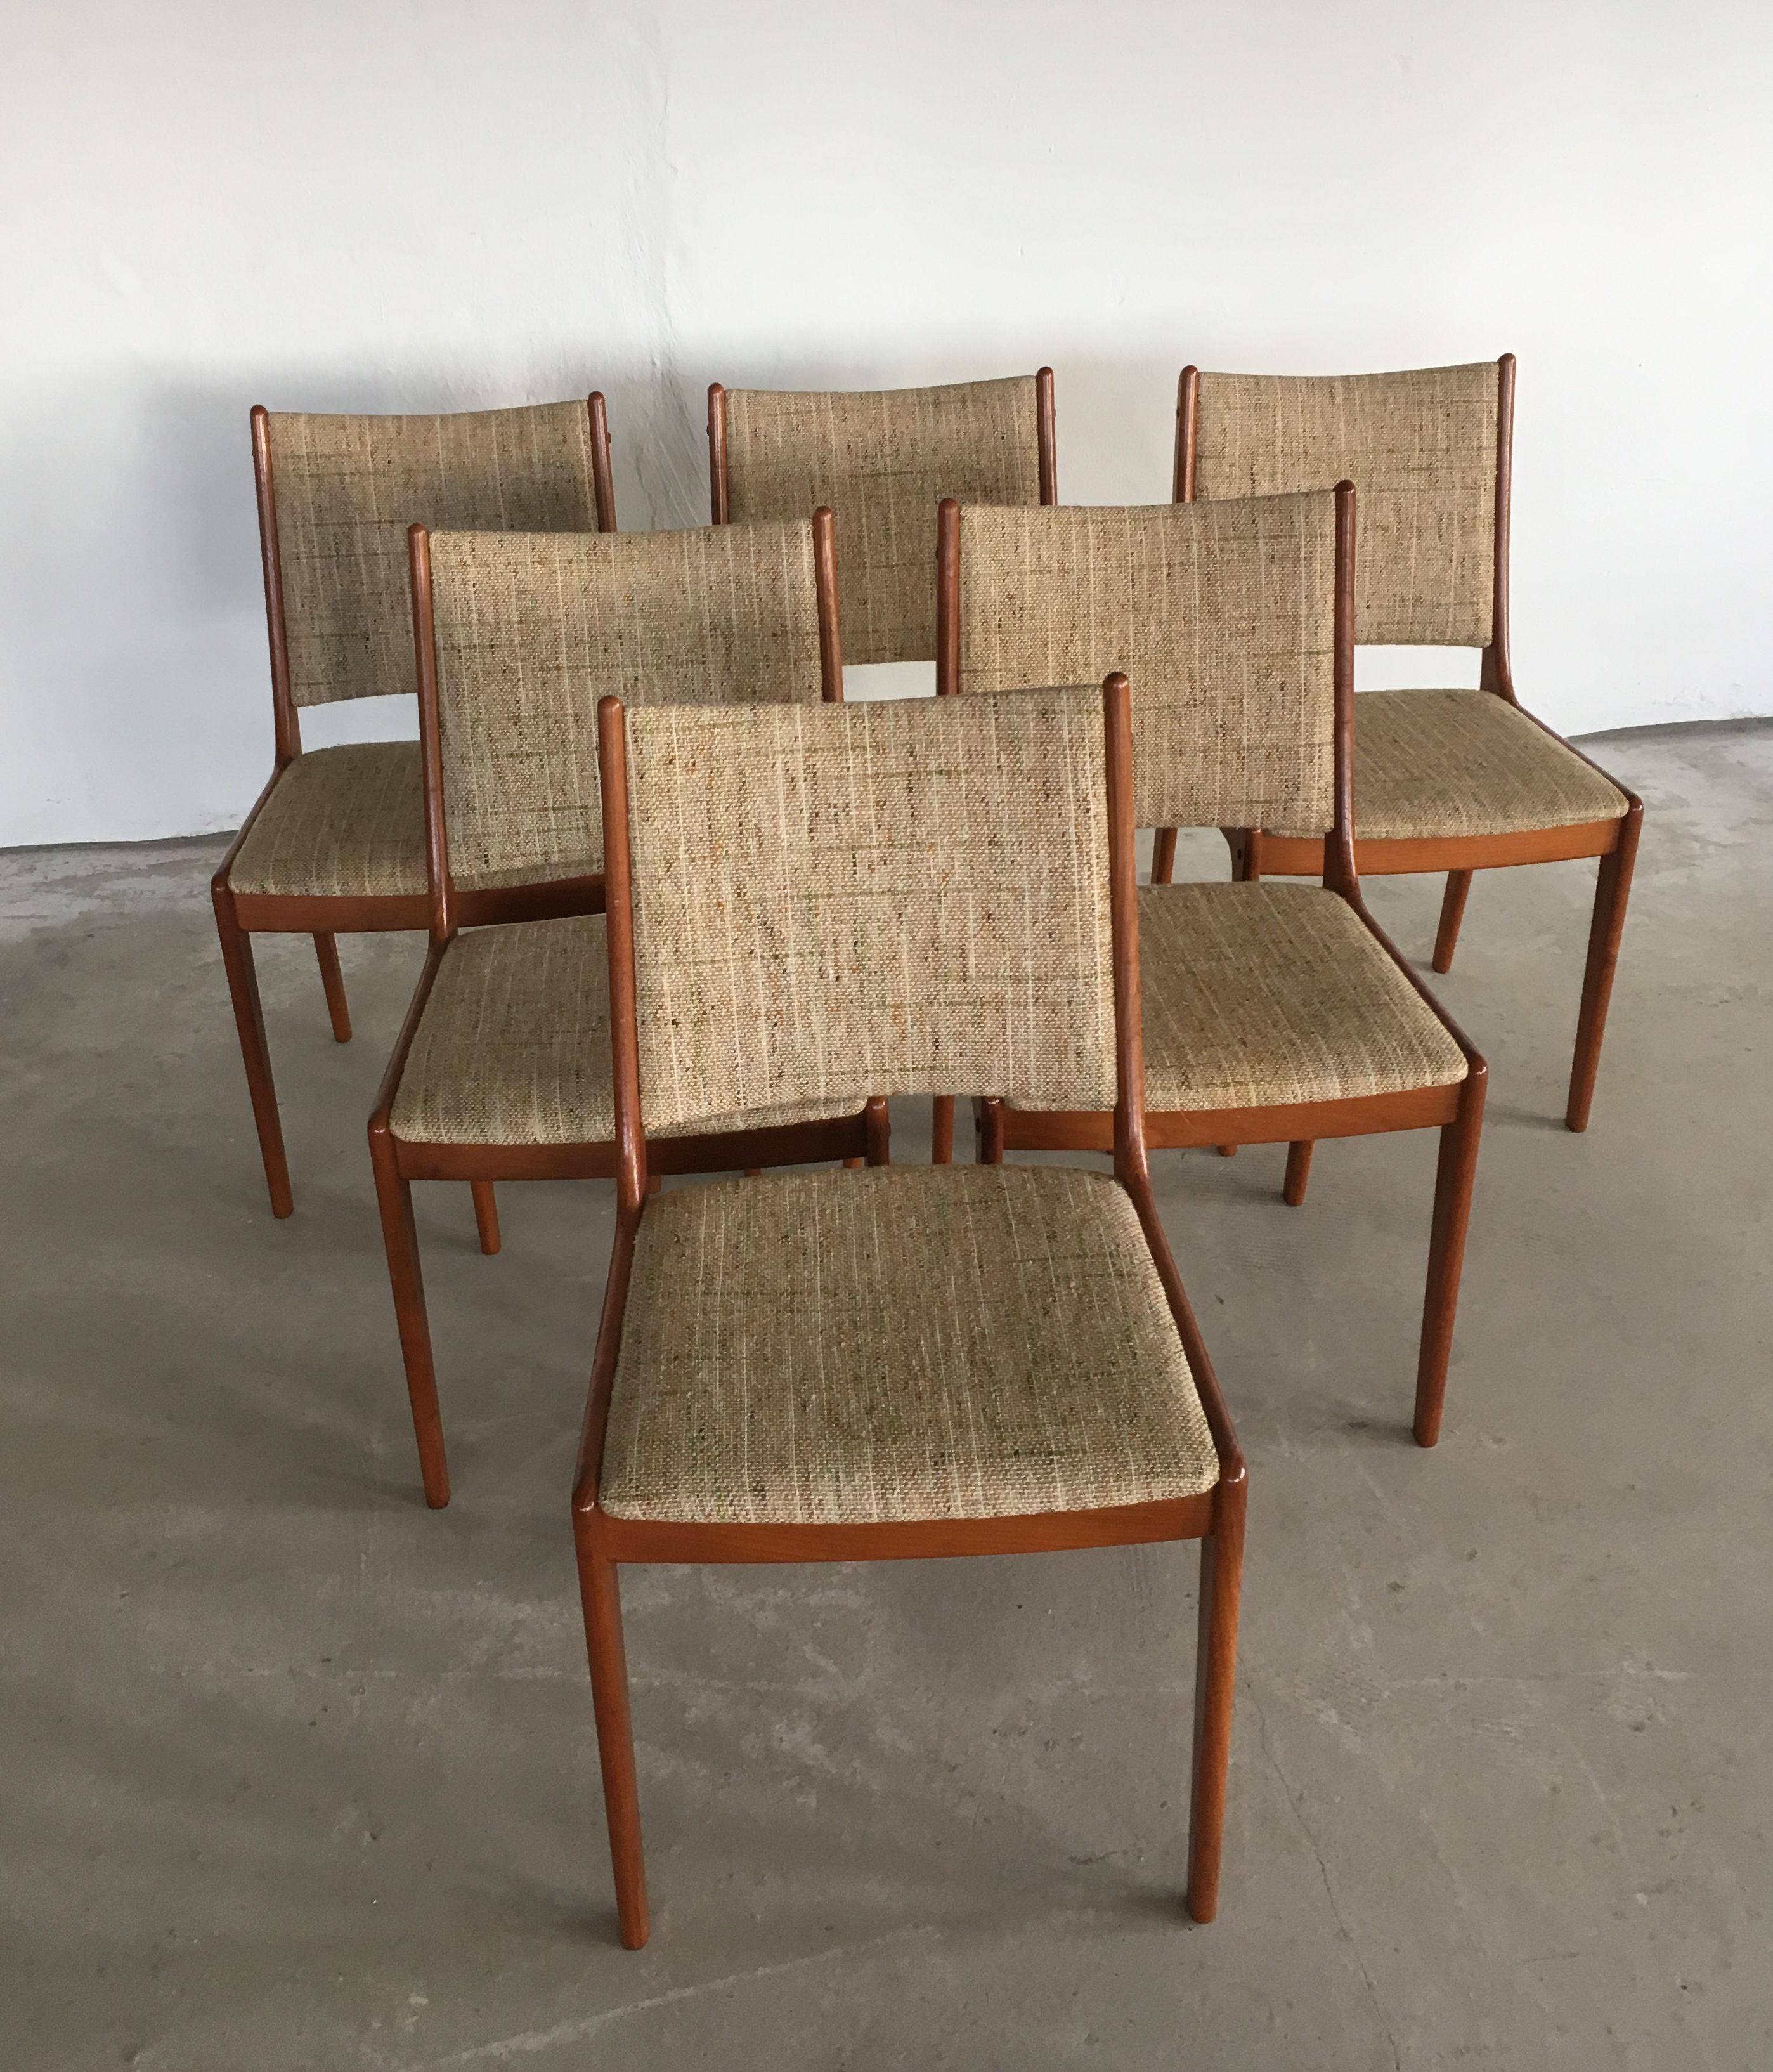 Set of six 1960s Johannes Andersen dining chairs in teak made by Uldum Møbler, Denmark.

The set of dining chairs feature a clean simple yet elegant design that will fit in well in most houses. 

The chairs have been fully restored and refinished by